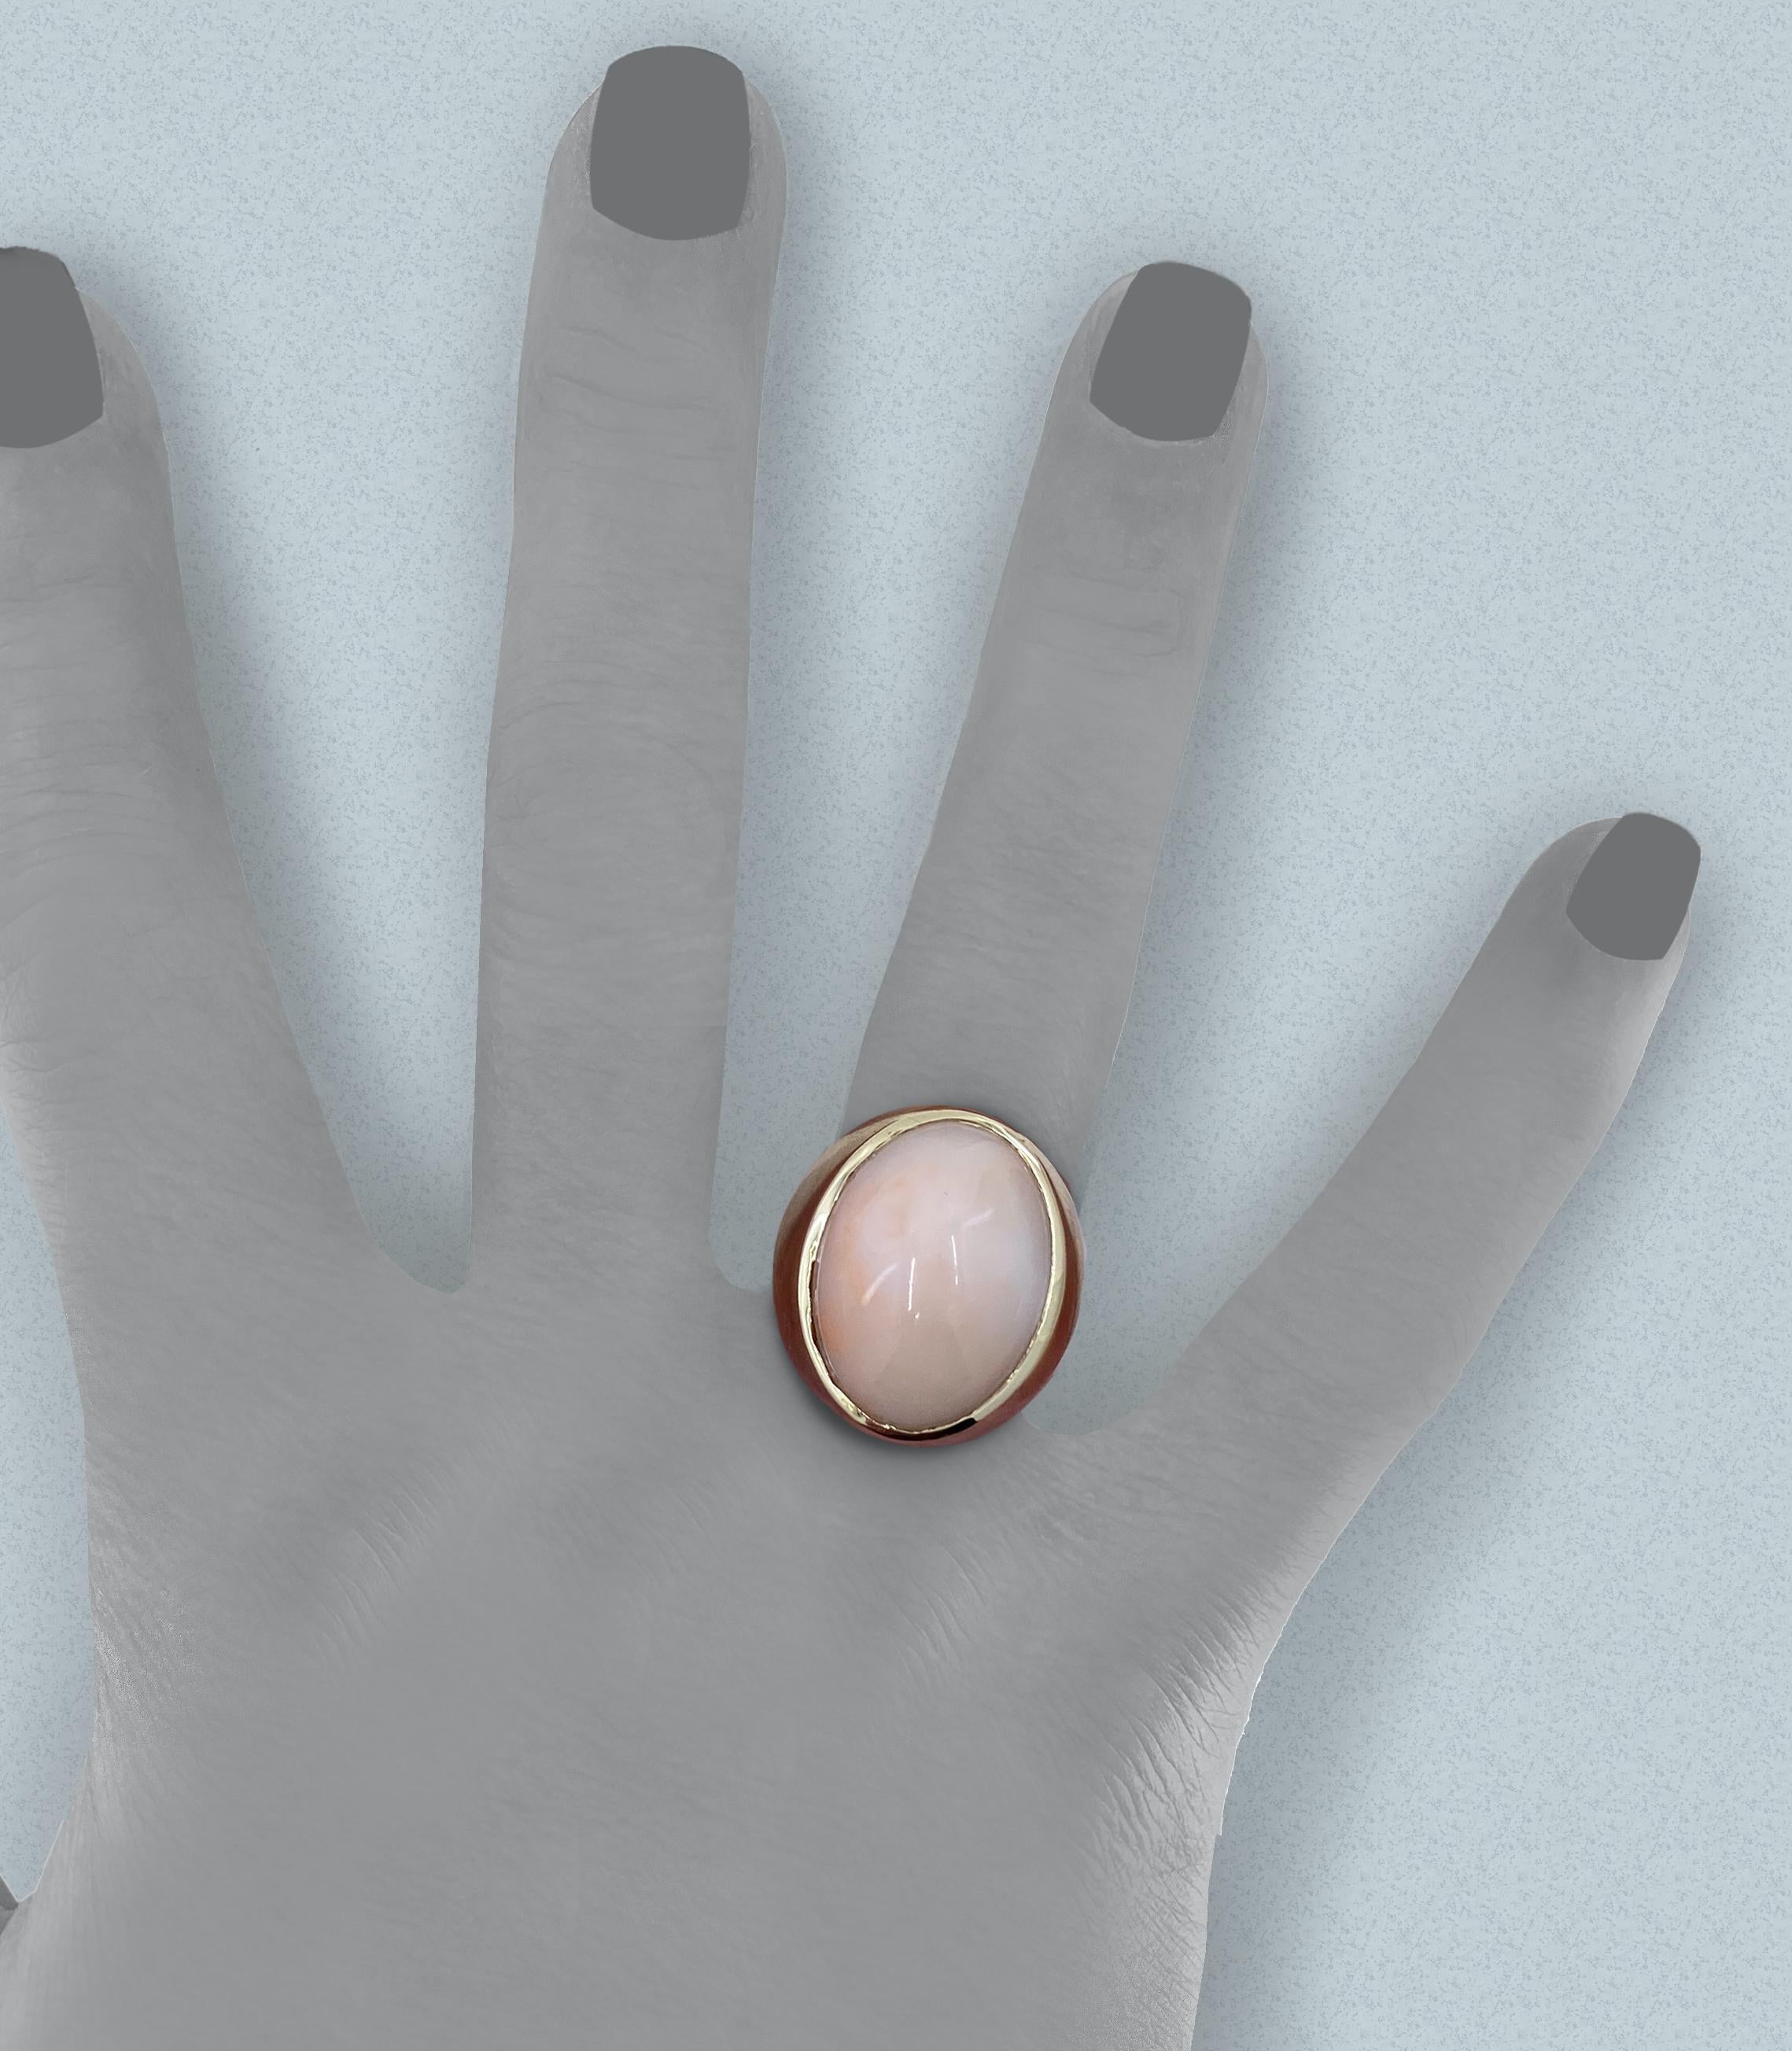 This eye-catching solitaire, probably produced in the 1960s or 1970s,  makes a bold statement, contrasting the delicate light peachy-pink (or is it pinky-peach?) of angel skin coral and the muscular signet-ring setting.  

The natural, very light